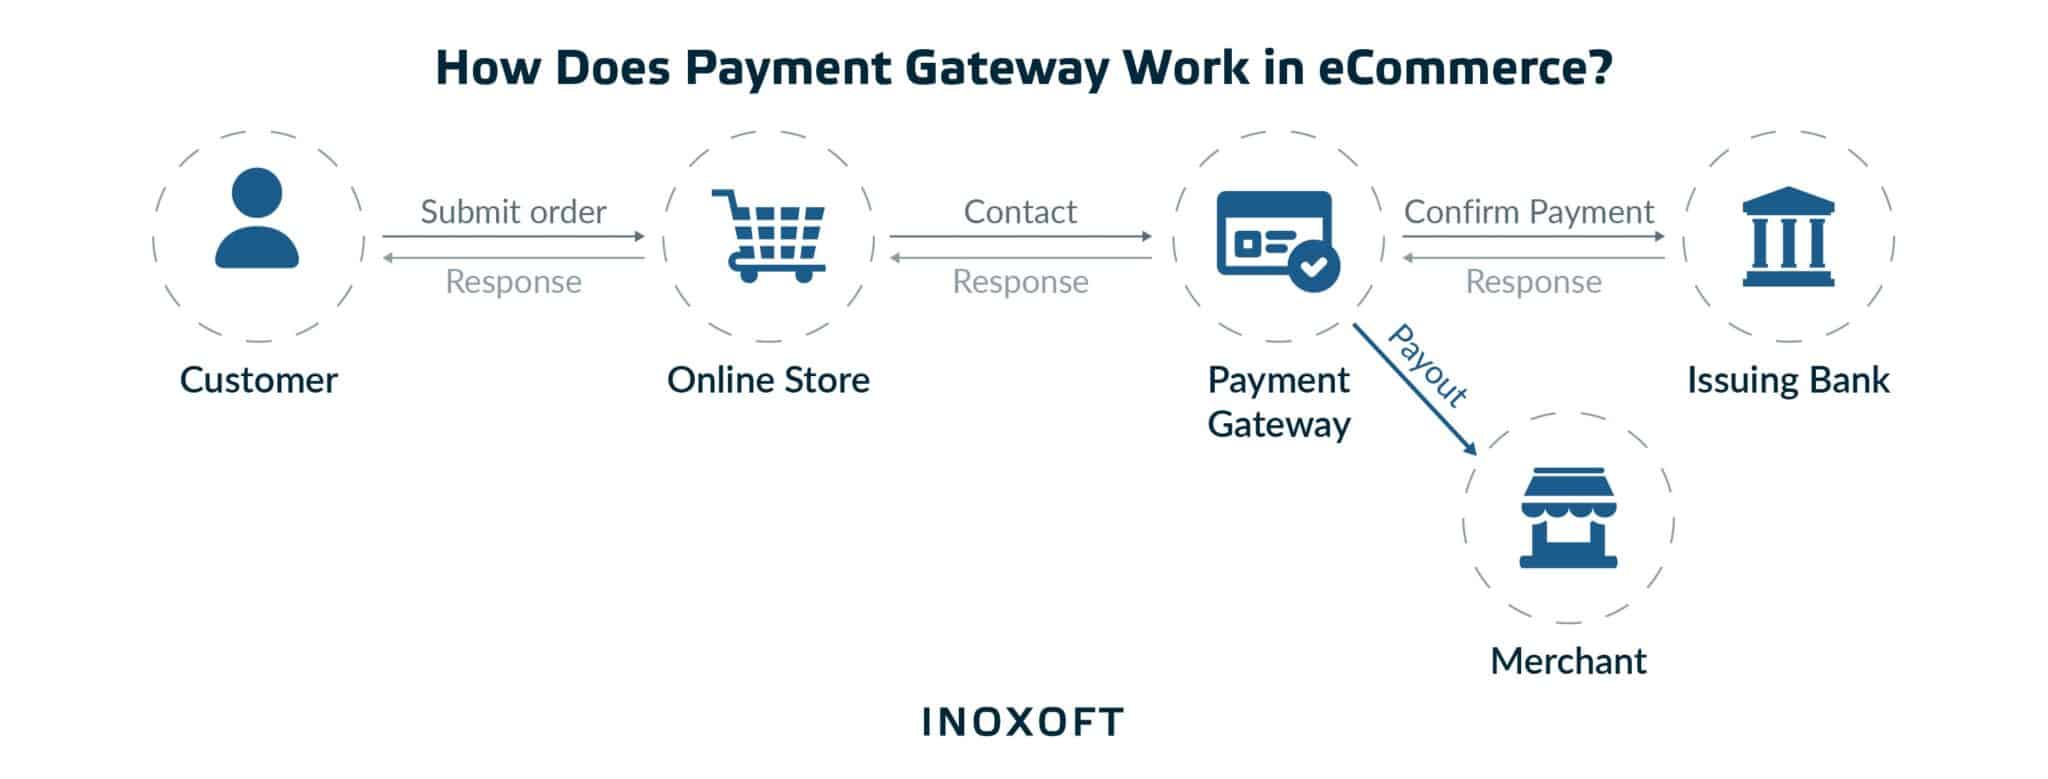 How Does an Online Payment Gateway Work in eCommerce?